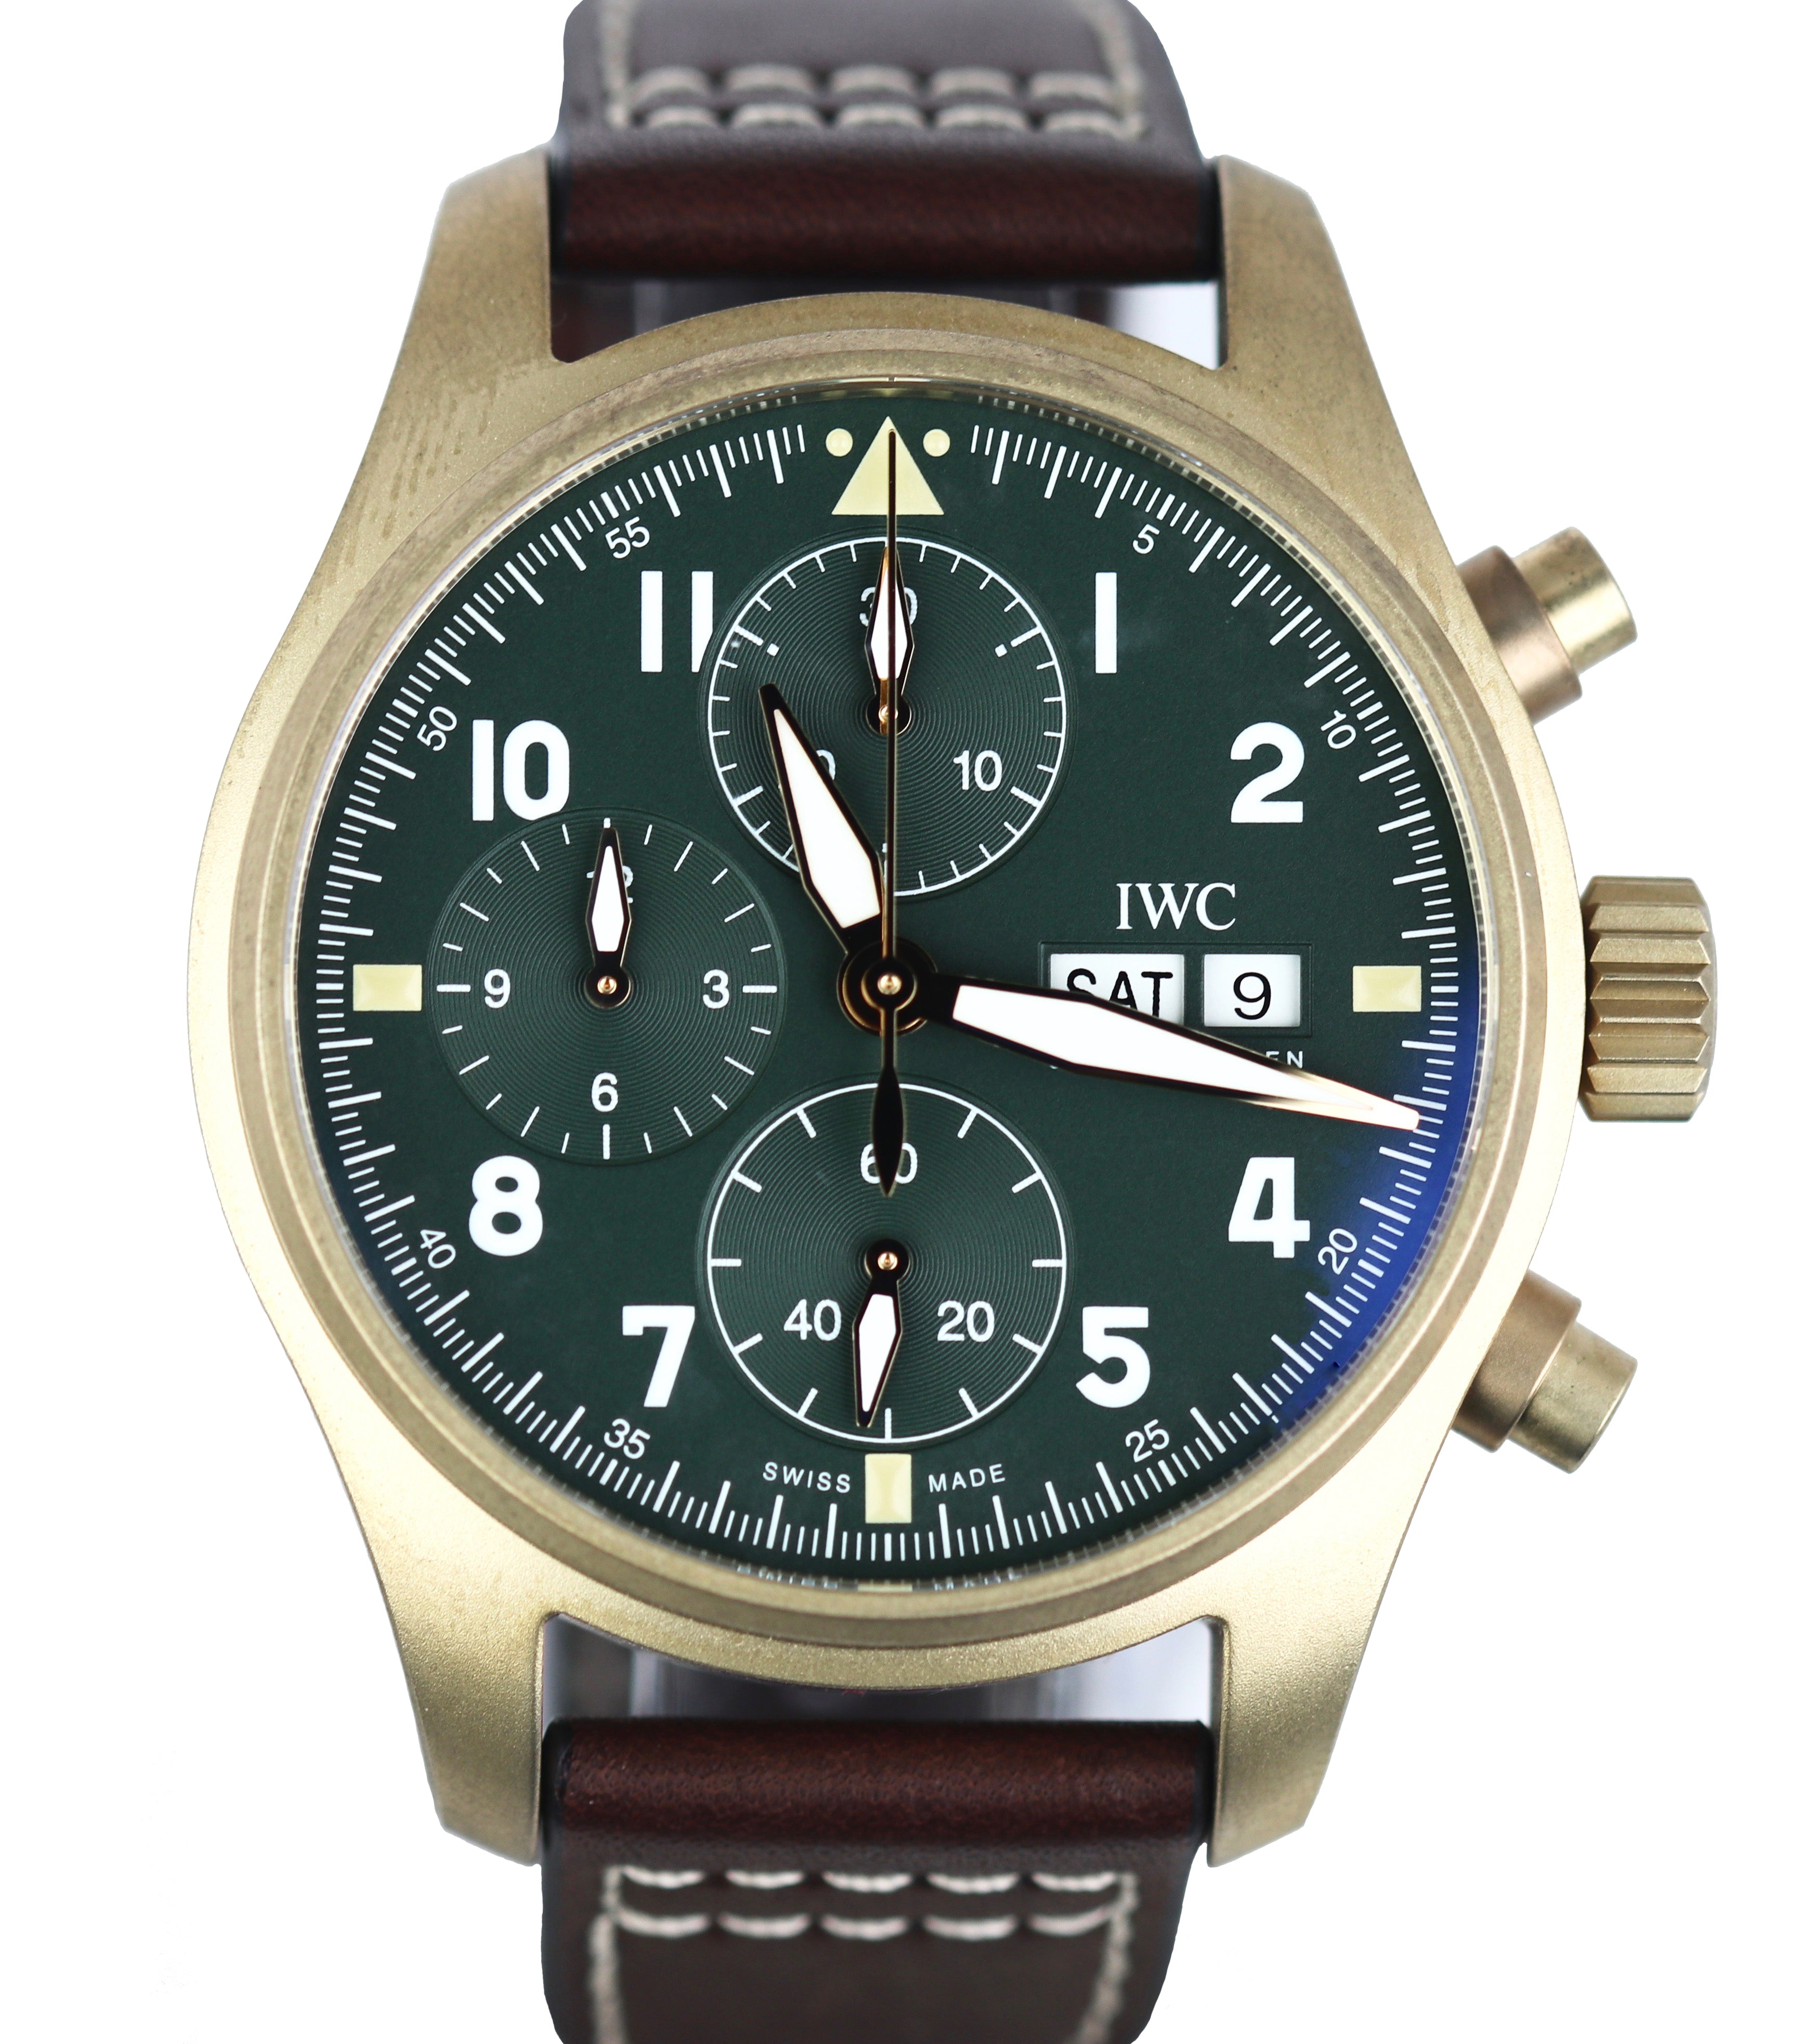 NEW IWC Spitfire Chronograph Day Date Green 41mm Bronze Auto IW387902 3879-02